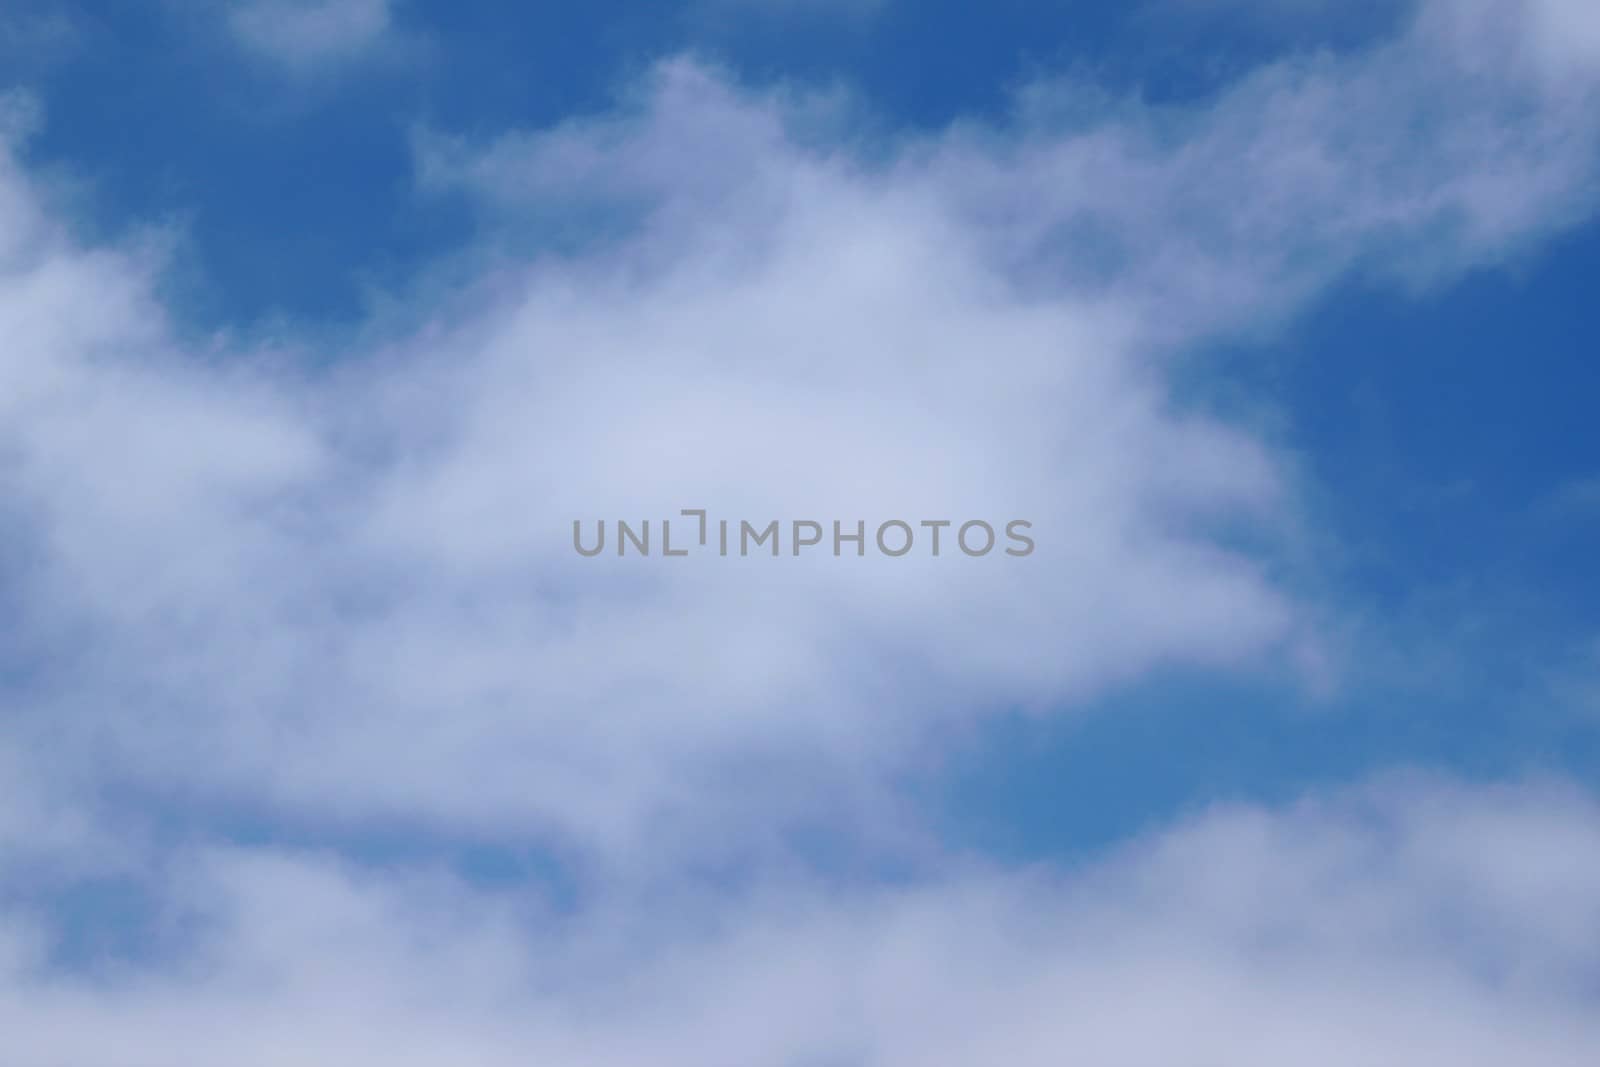 Background shot of a blue sky with white clouds.